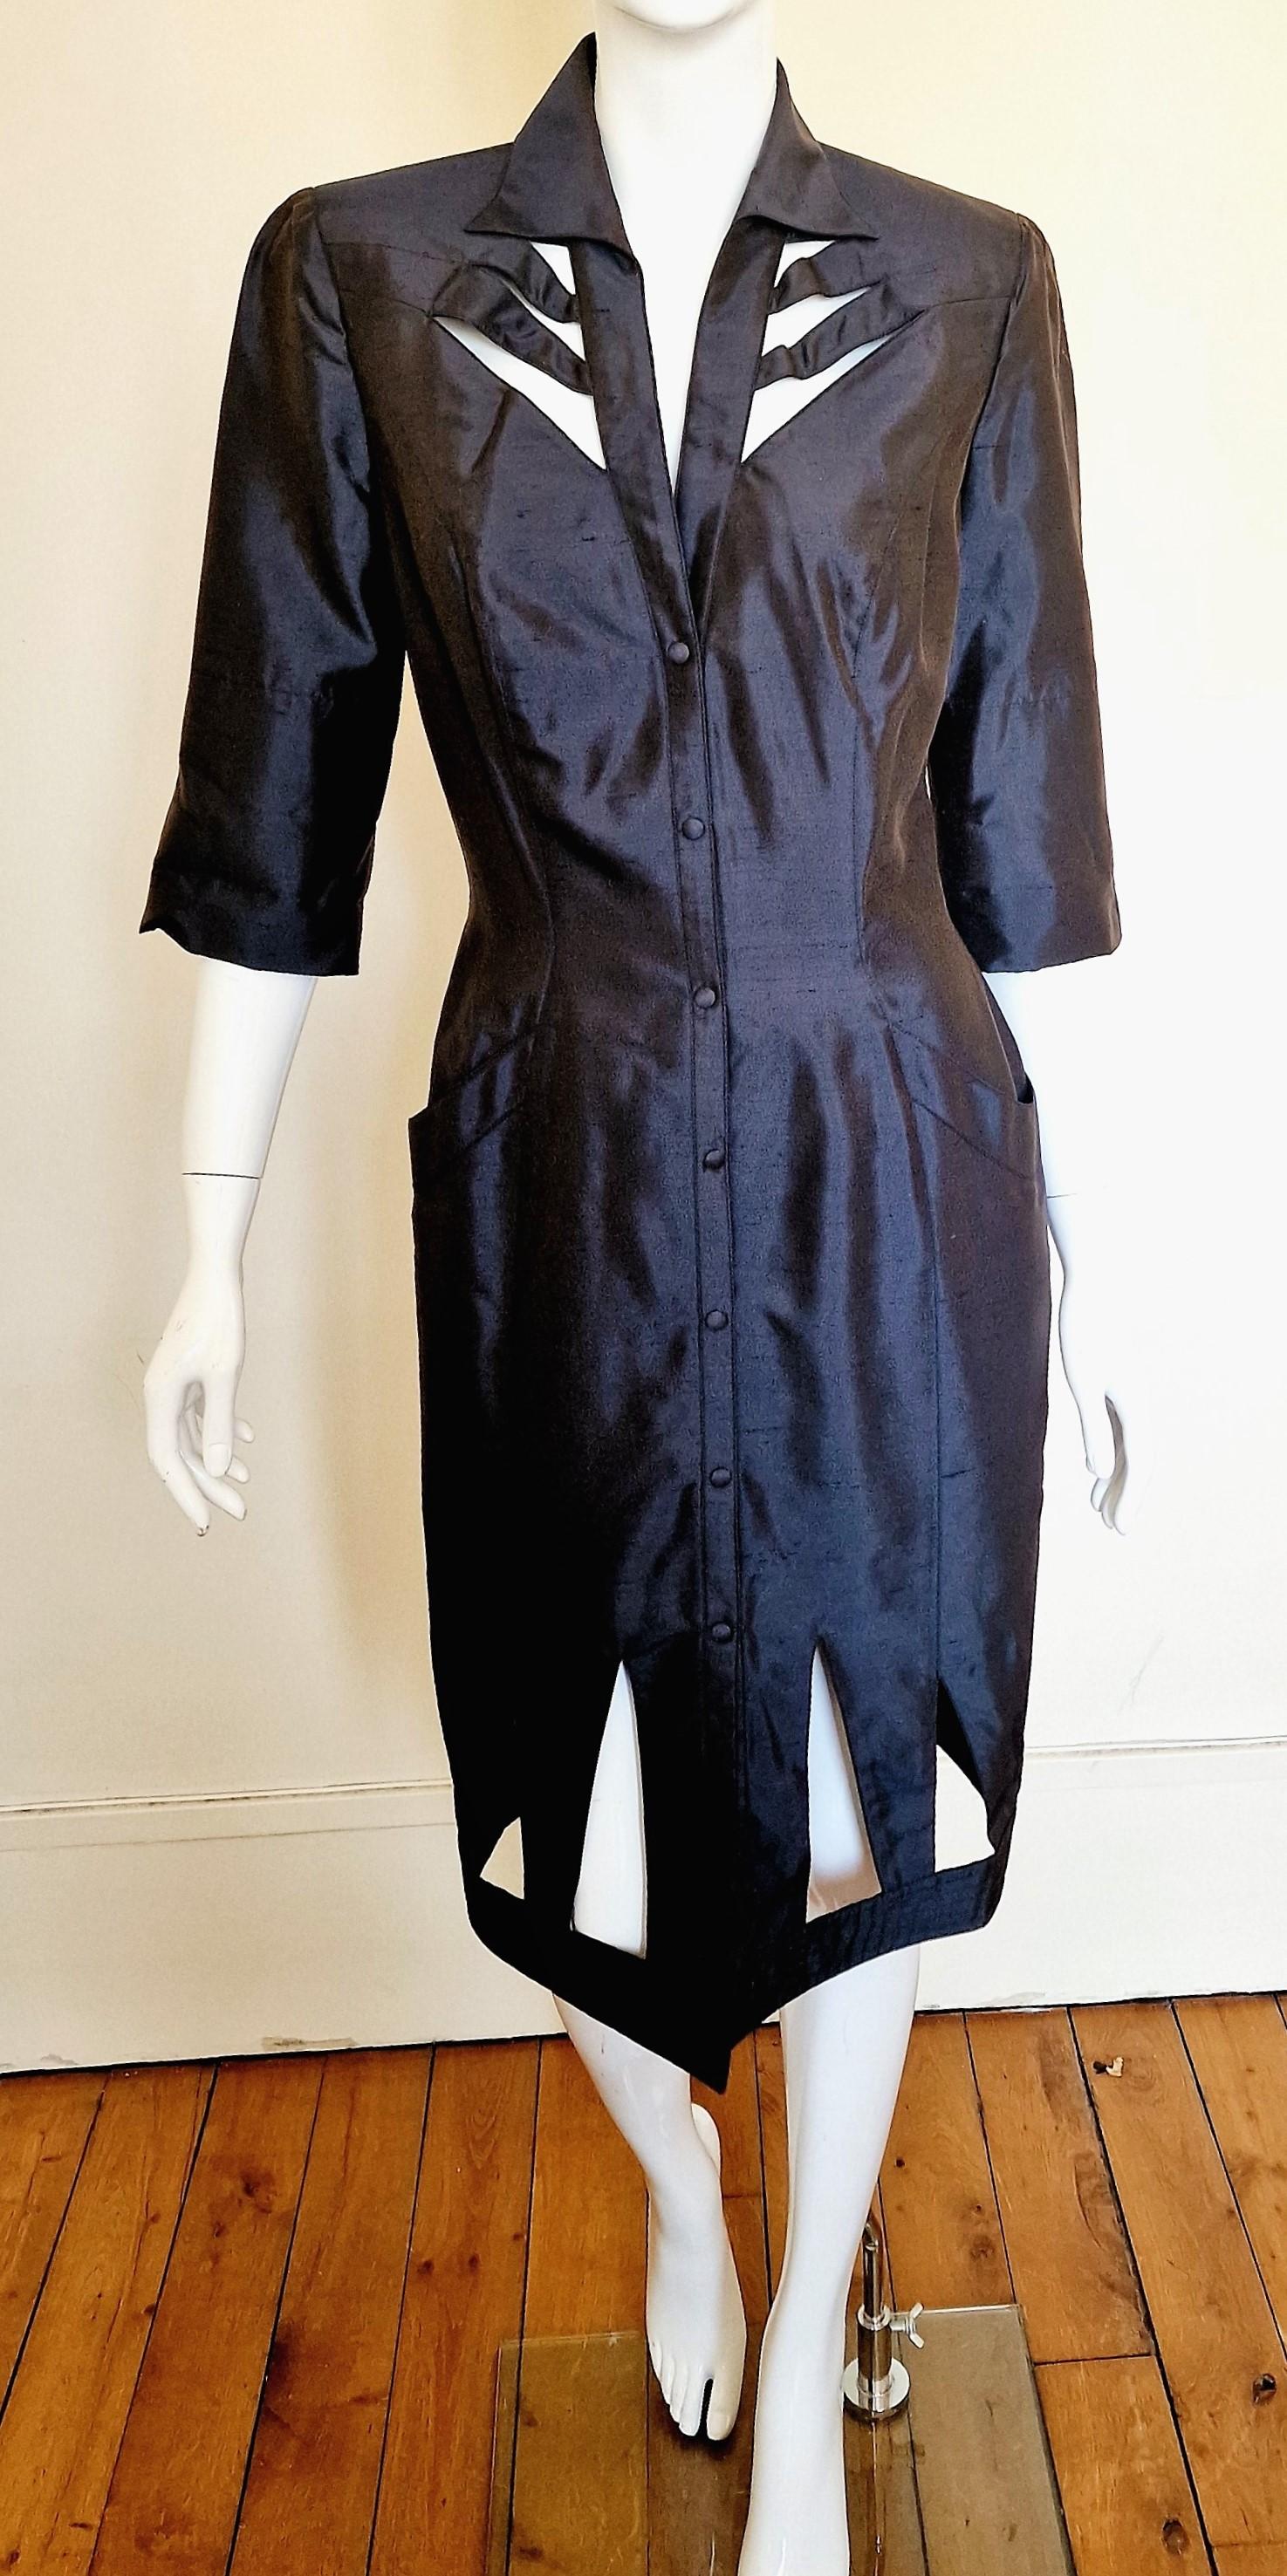 Panel cut-out dress by Thierry Mugler!
With shoulder pads. 
2 pockets at the hips, wasp waist, it empashize your curves :)
Graphite / metal color. 
The fabric is 